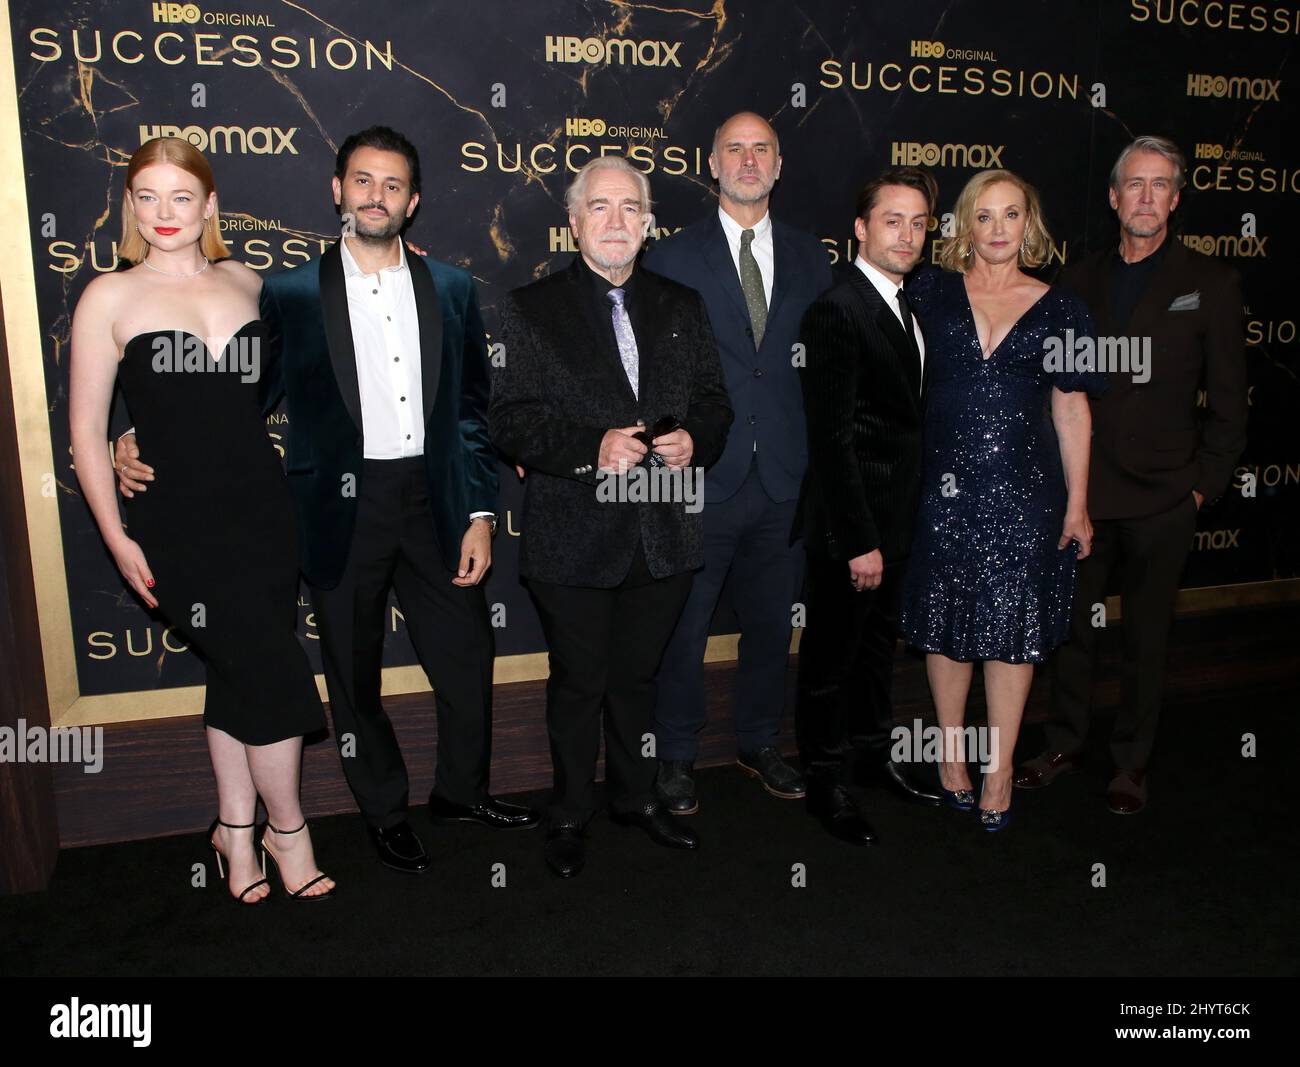 Sarah Snook, Arian Moayed, Brian Cox, Jesse Armstrong, Kieran Culkin, J. Smith Cameron and Alan Ruck attending the 'Succession' Season 3 Premiere held at the Museum of Natural History on October 12, 2021 in New York City, NY Stock Photo